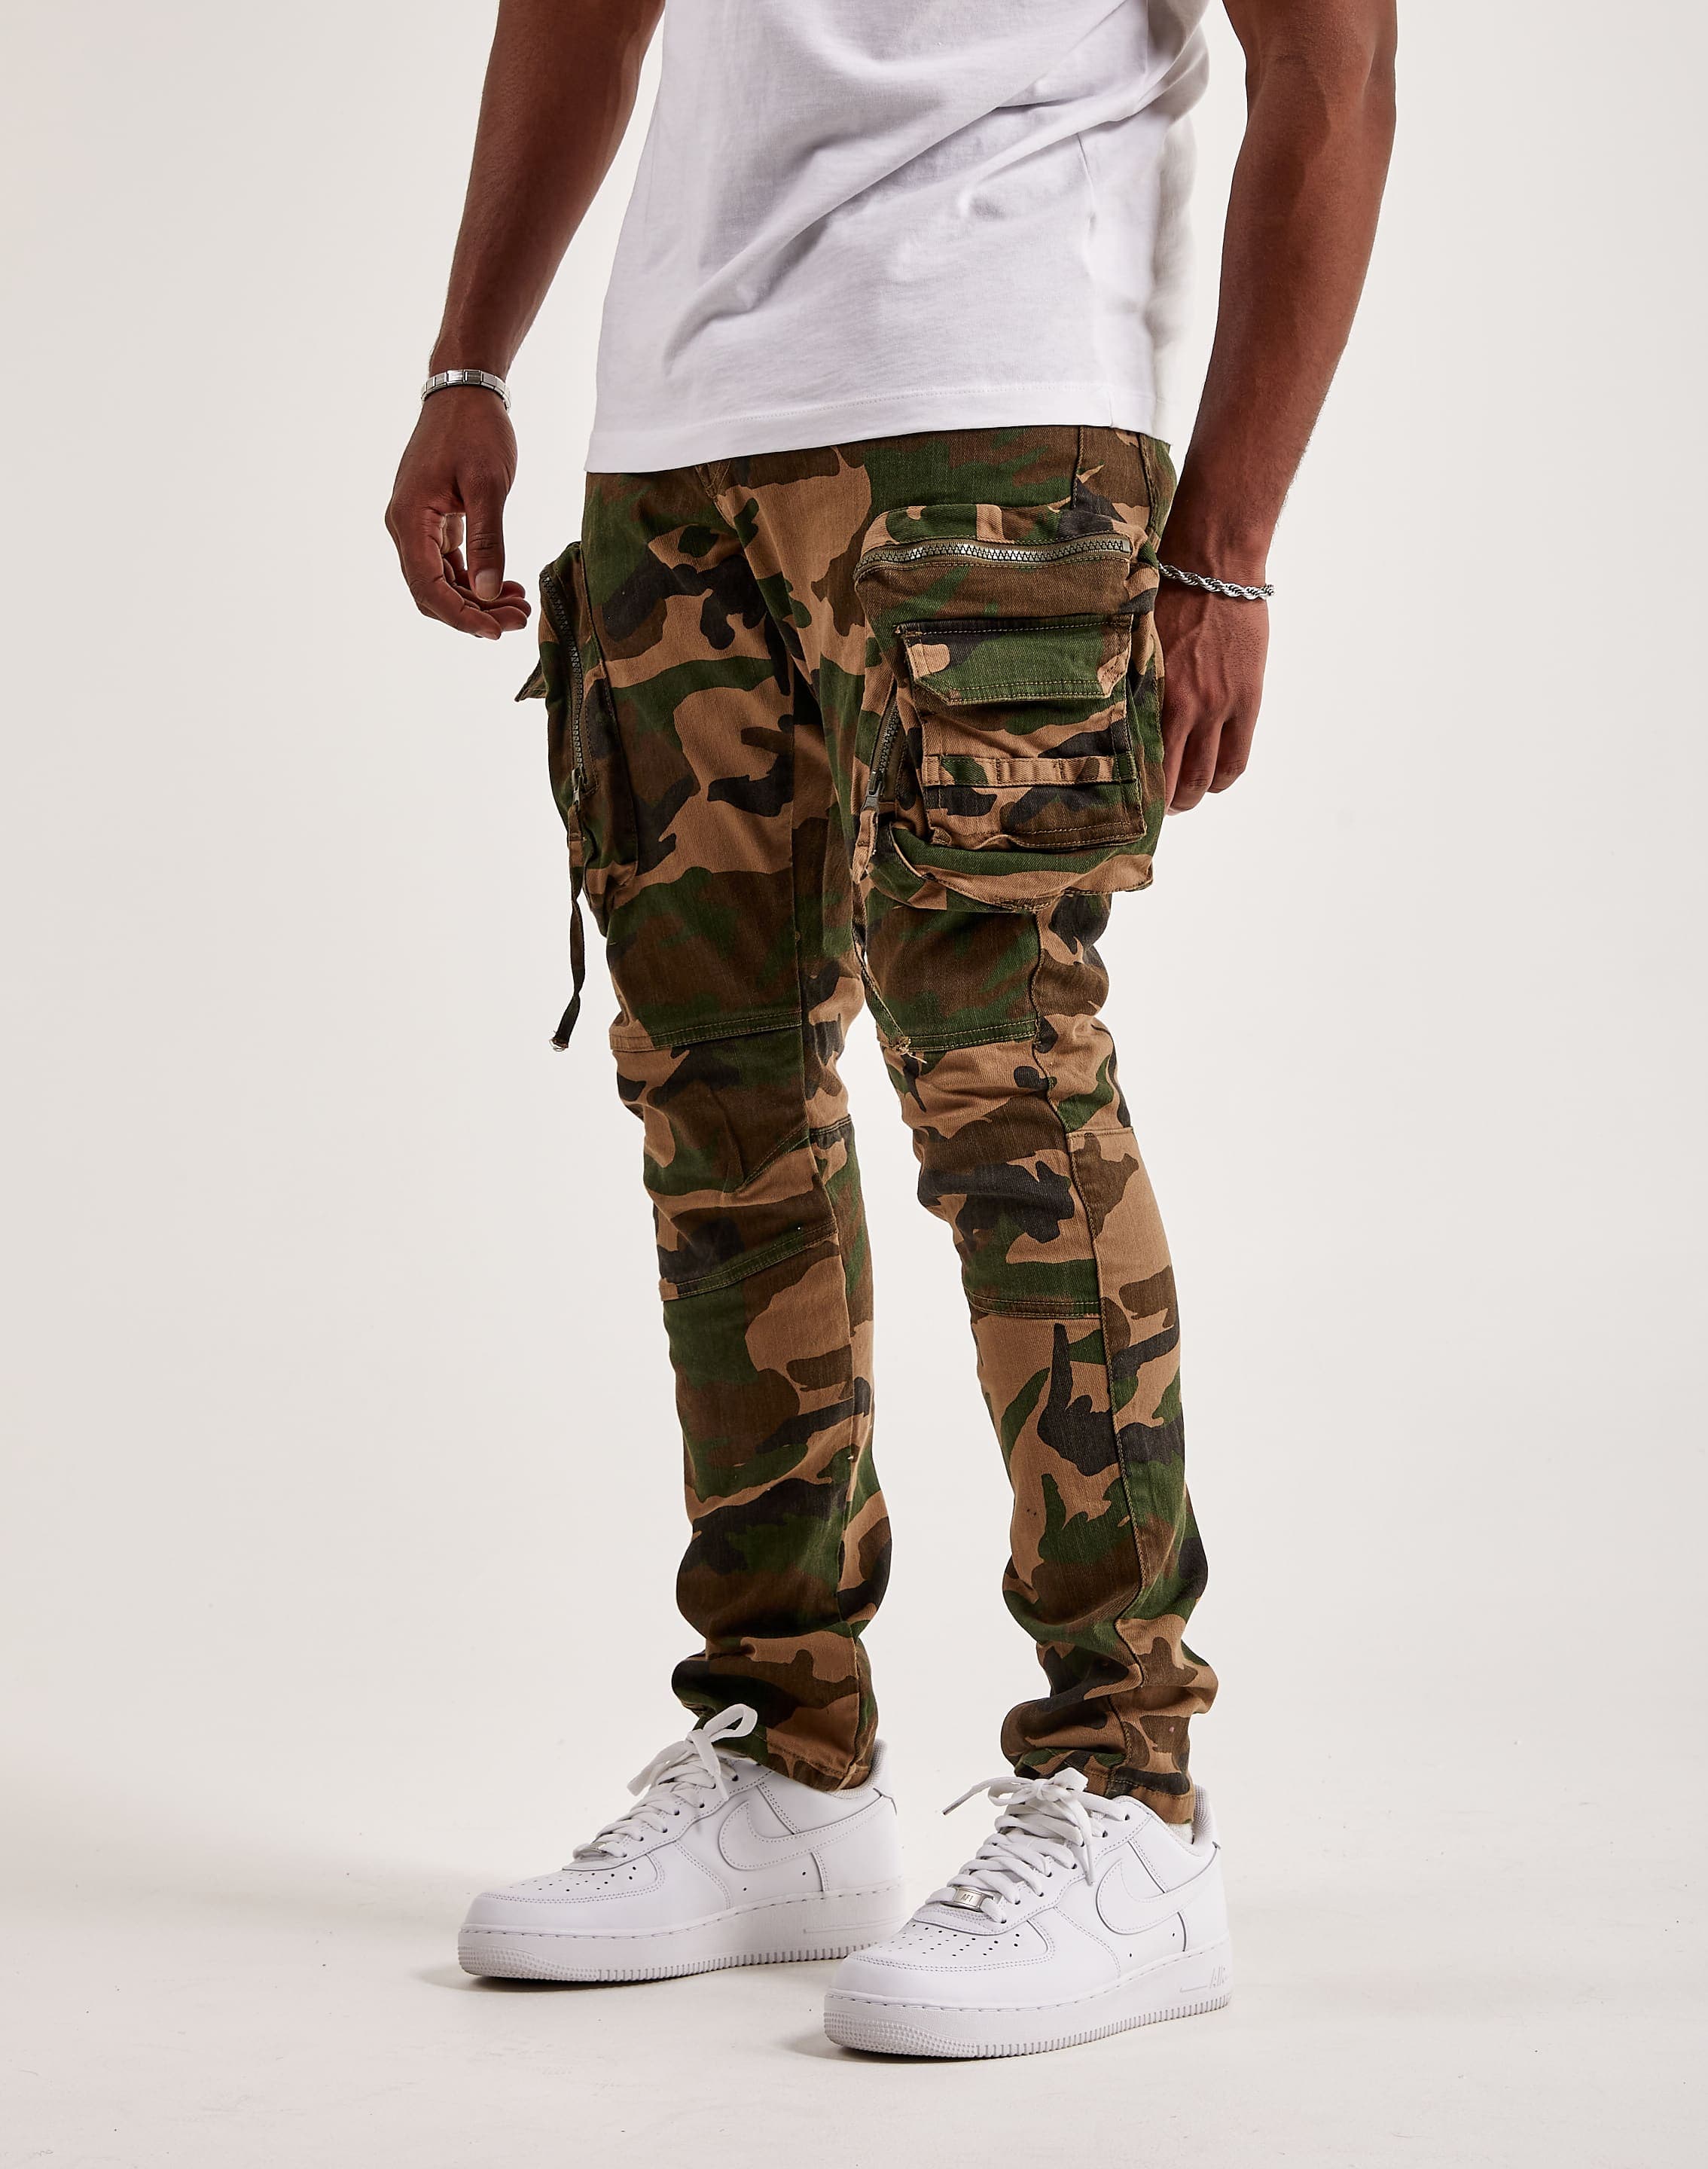 Smoke Rise Slim Tapered Jeans – DTLR